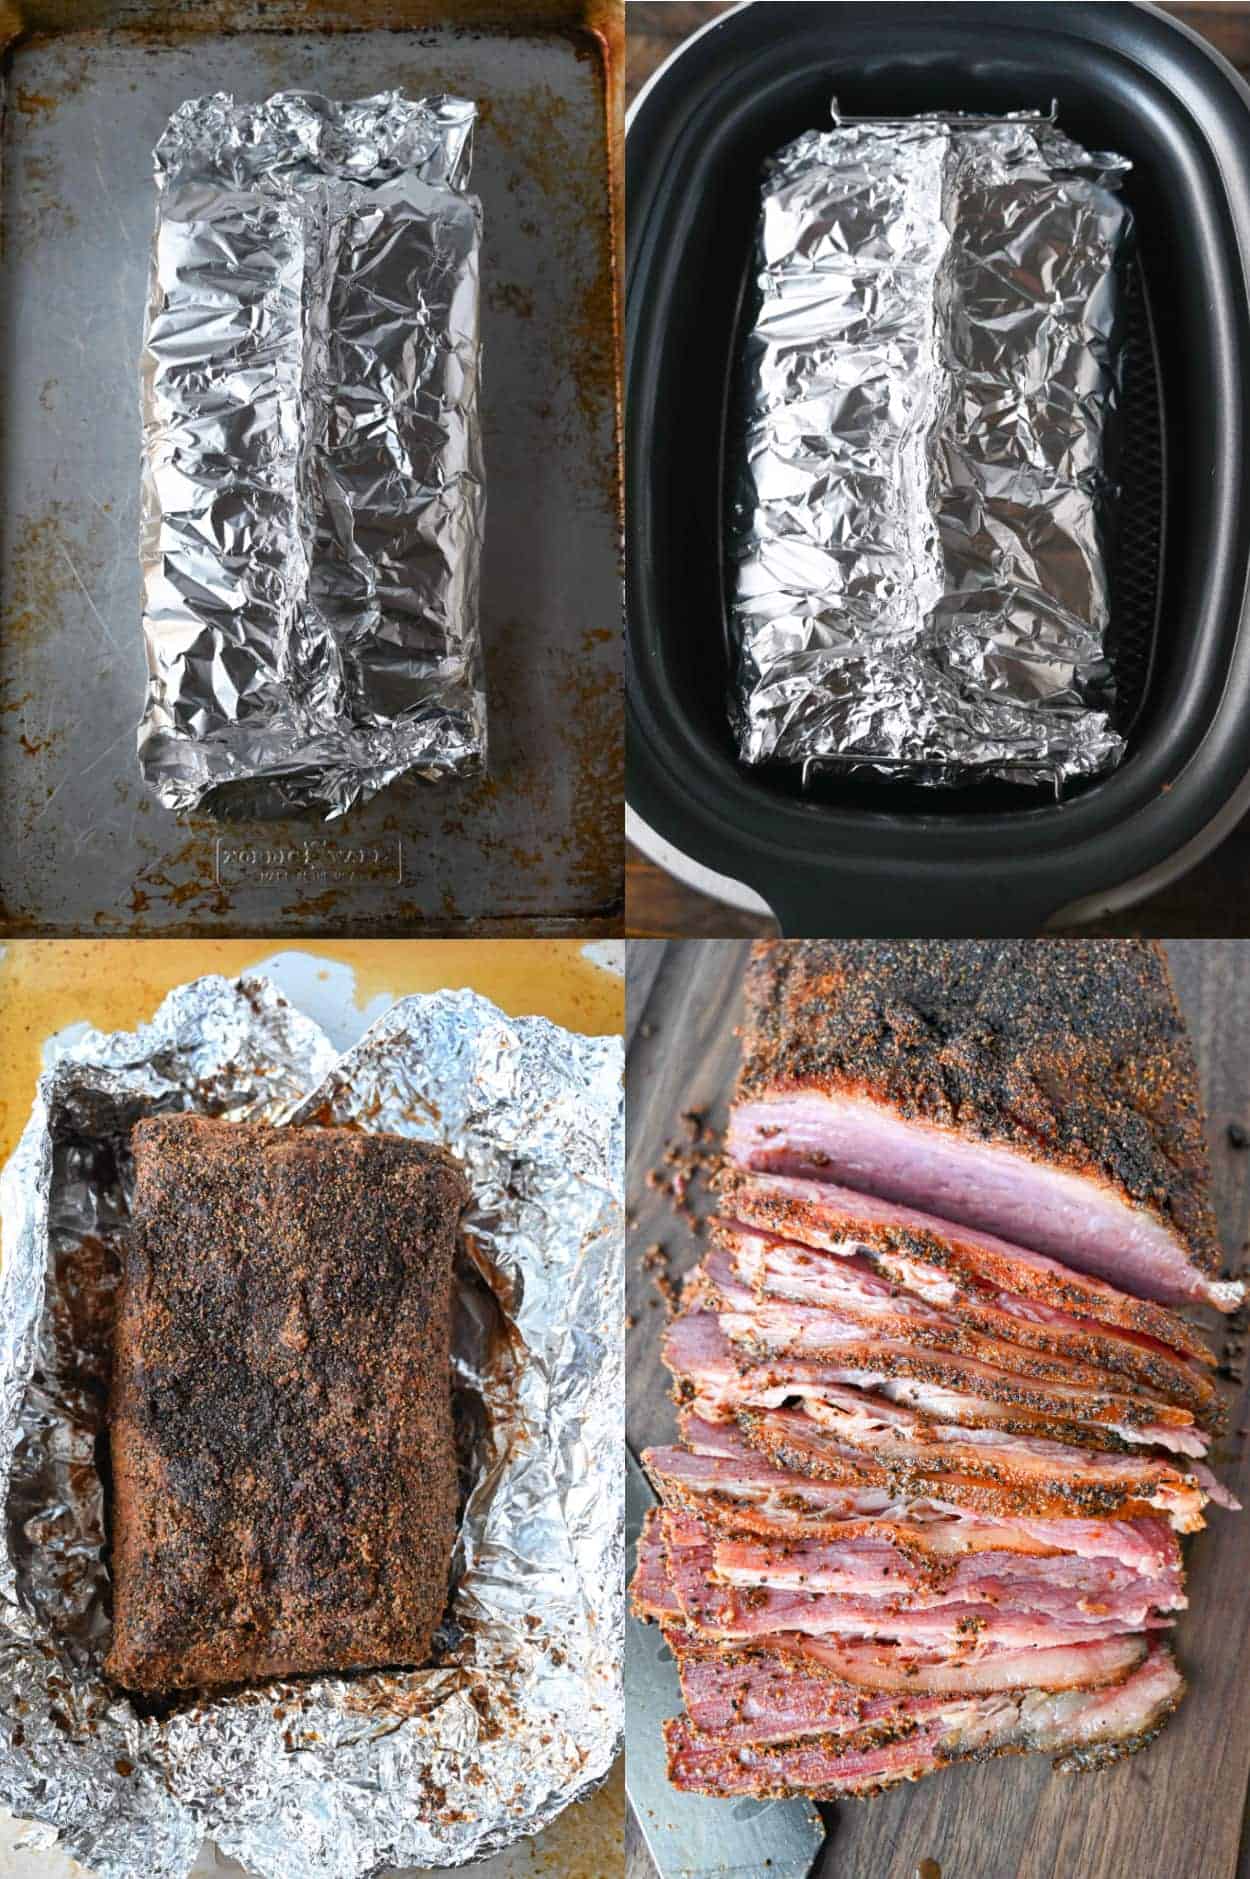 Four process photos. First one, corned beef wrapped tightly in the aluminum foil. Second one, wrapped corned beef placed inside the slow cooker. Third one, corned beef that has been baked in the oven. Fourth one, corned beef that has been sliced thinly.